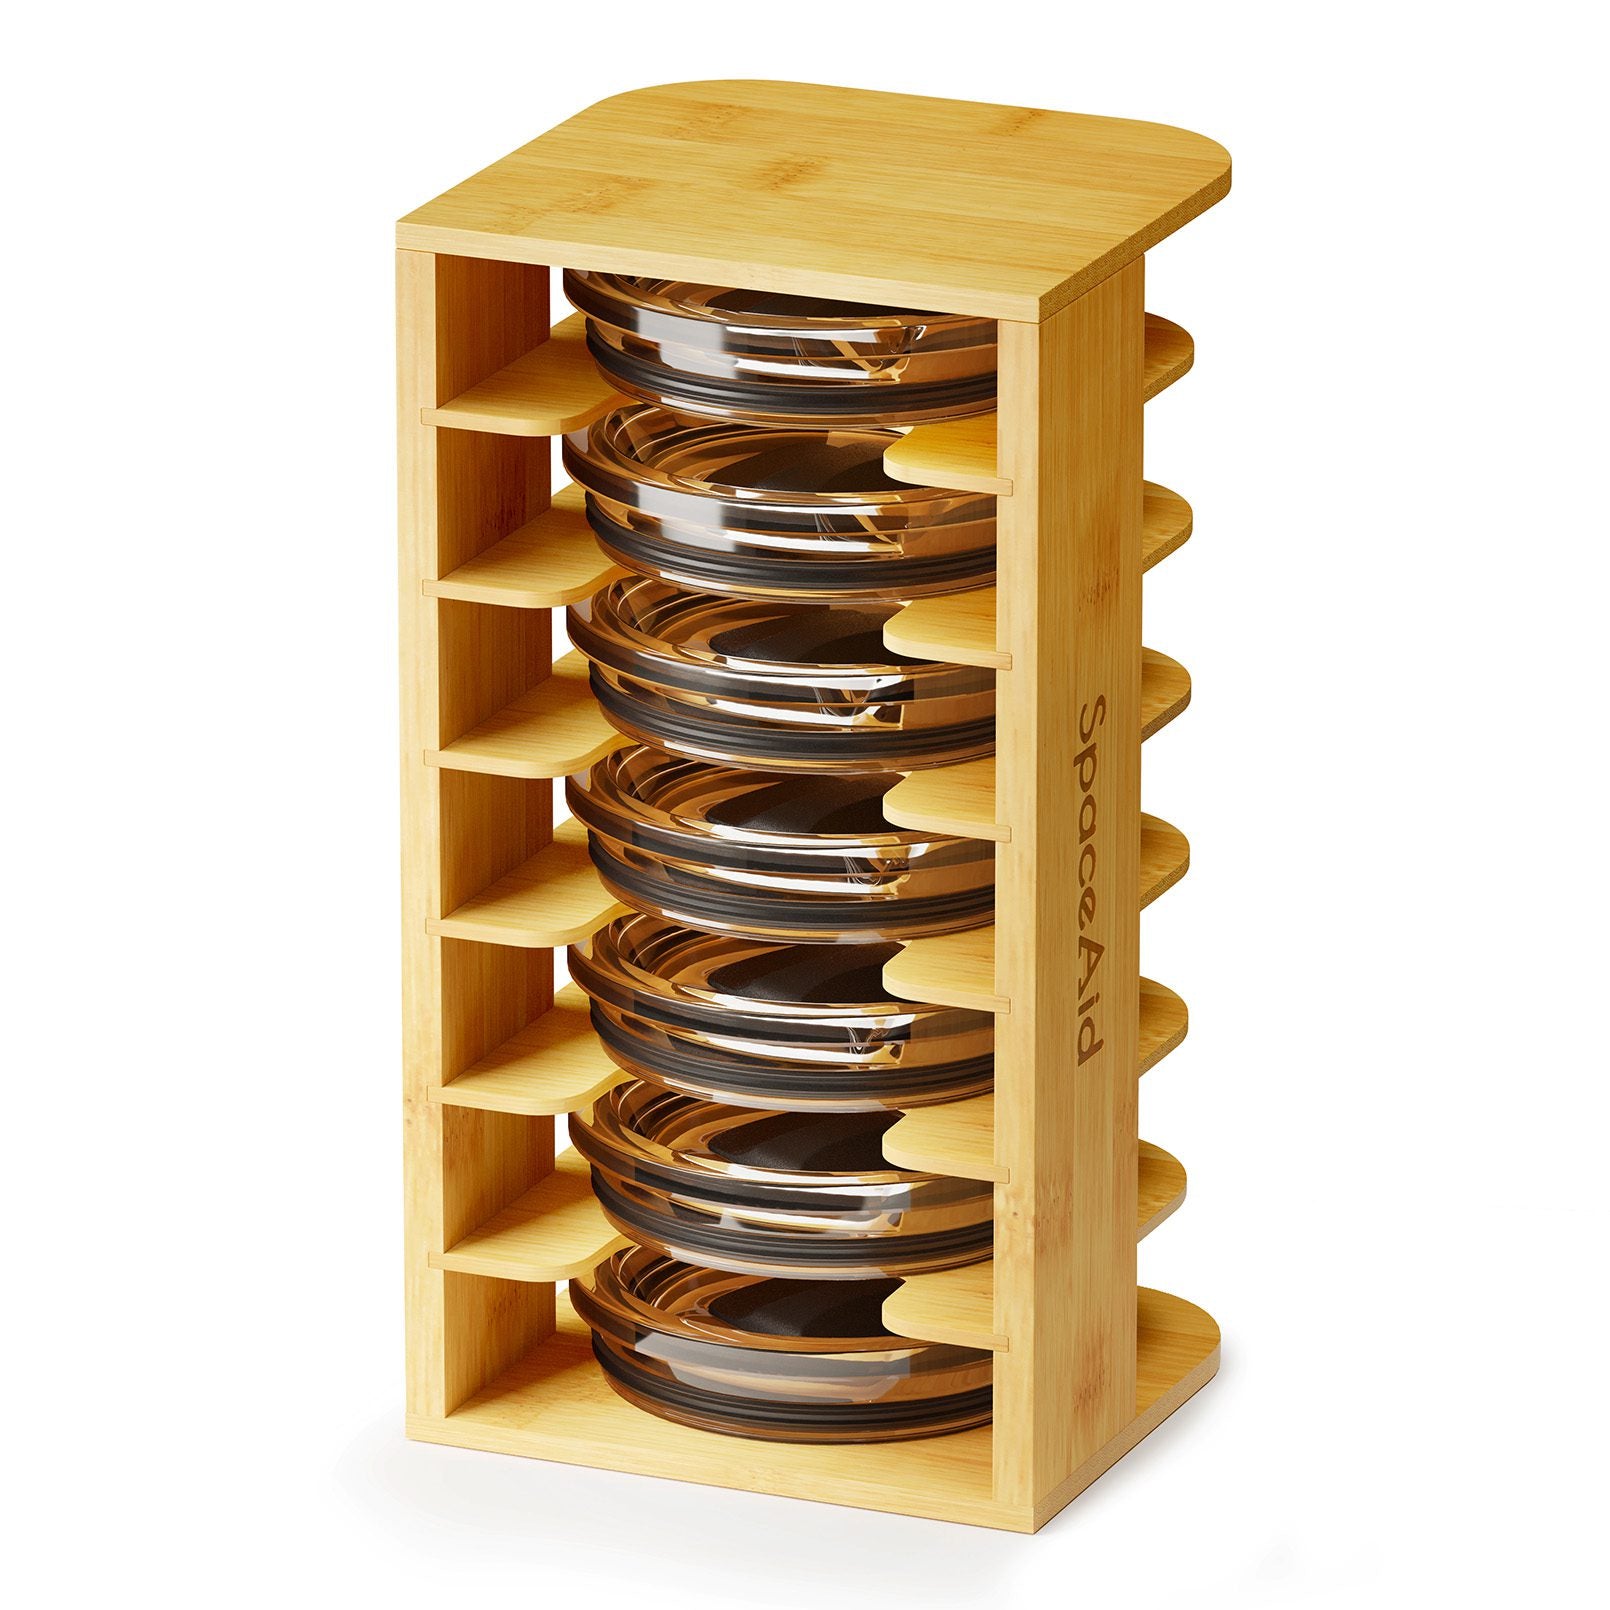 SpaceAid Bamboo Plastic Lid Organizer for Kitchen